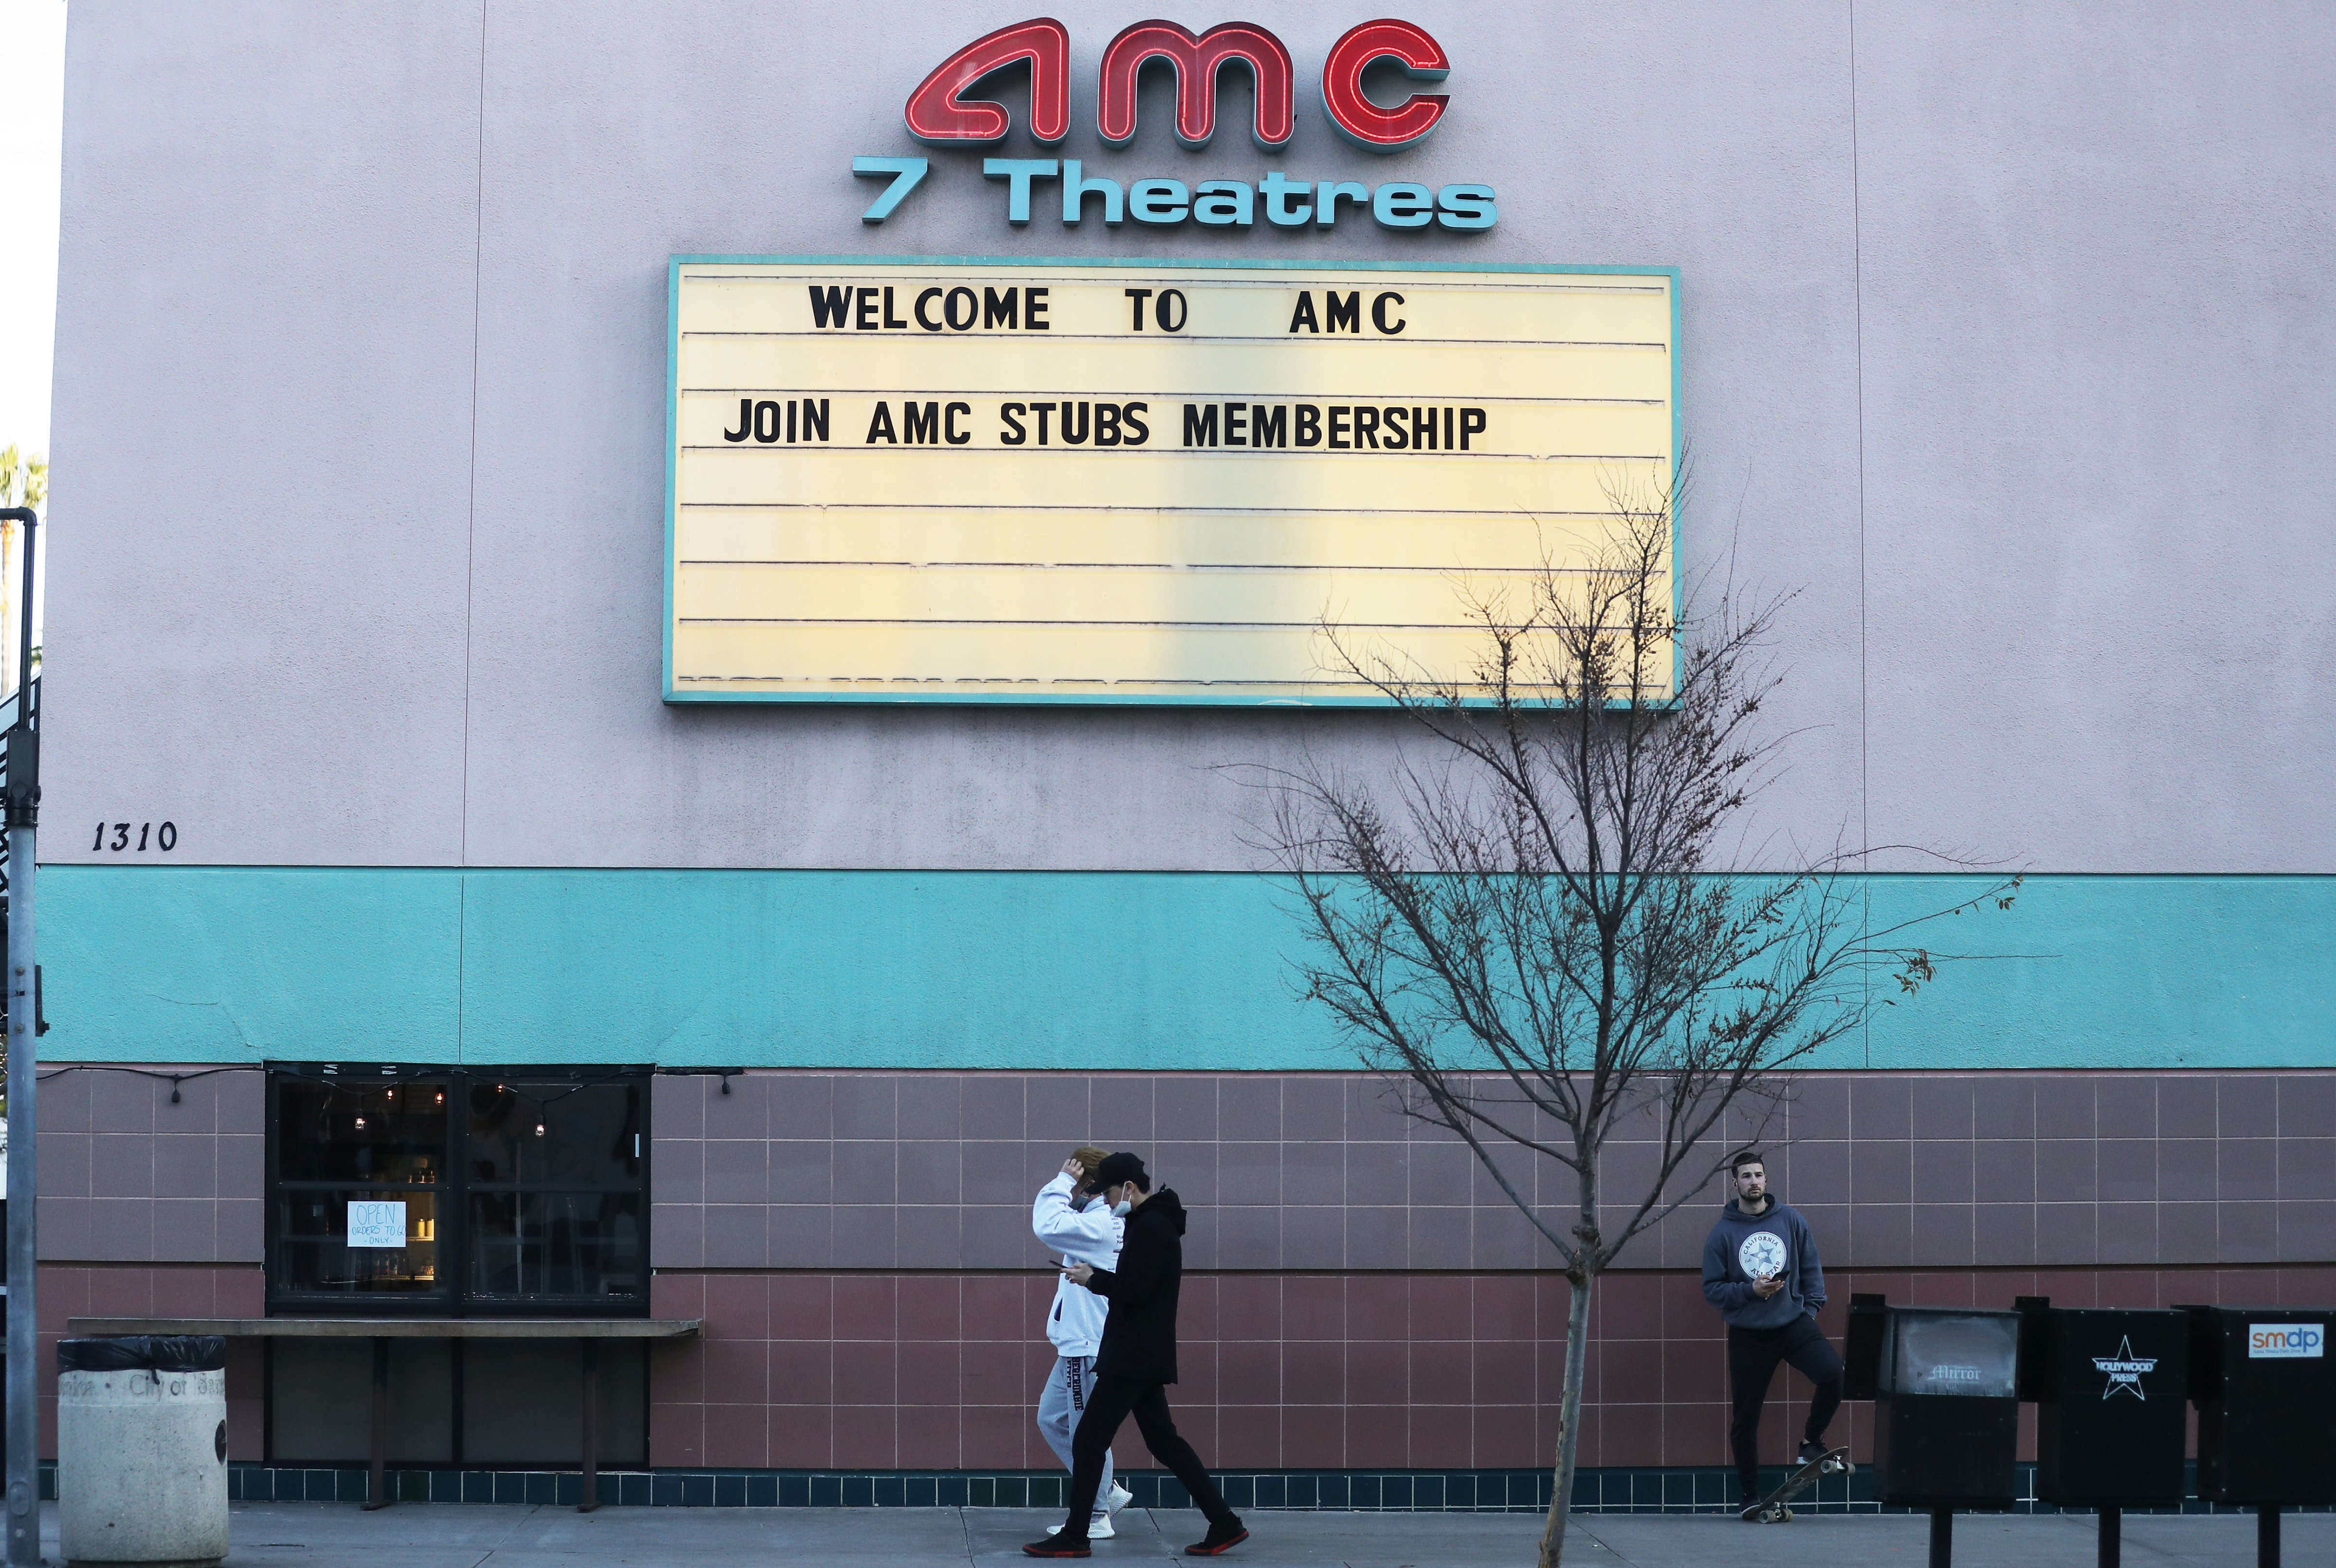 People walk outside a closed AMC movie theater on March 17, 2020 in Santa Monica, California. AMC Theatres is closing all their theaters nationwide in response to the coronavirus (COVID-19) pandemic. (Mario Tama—Getty Images)